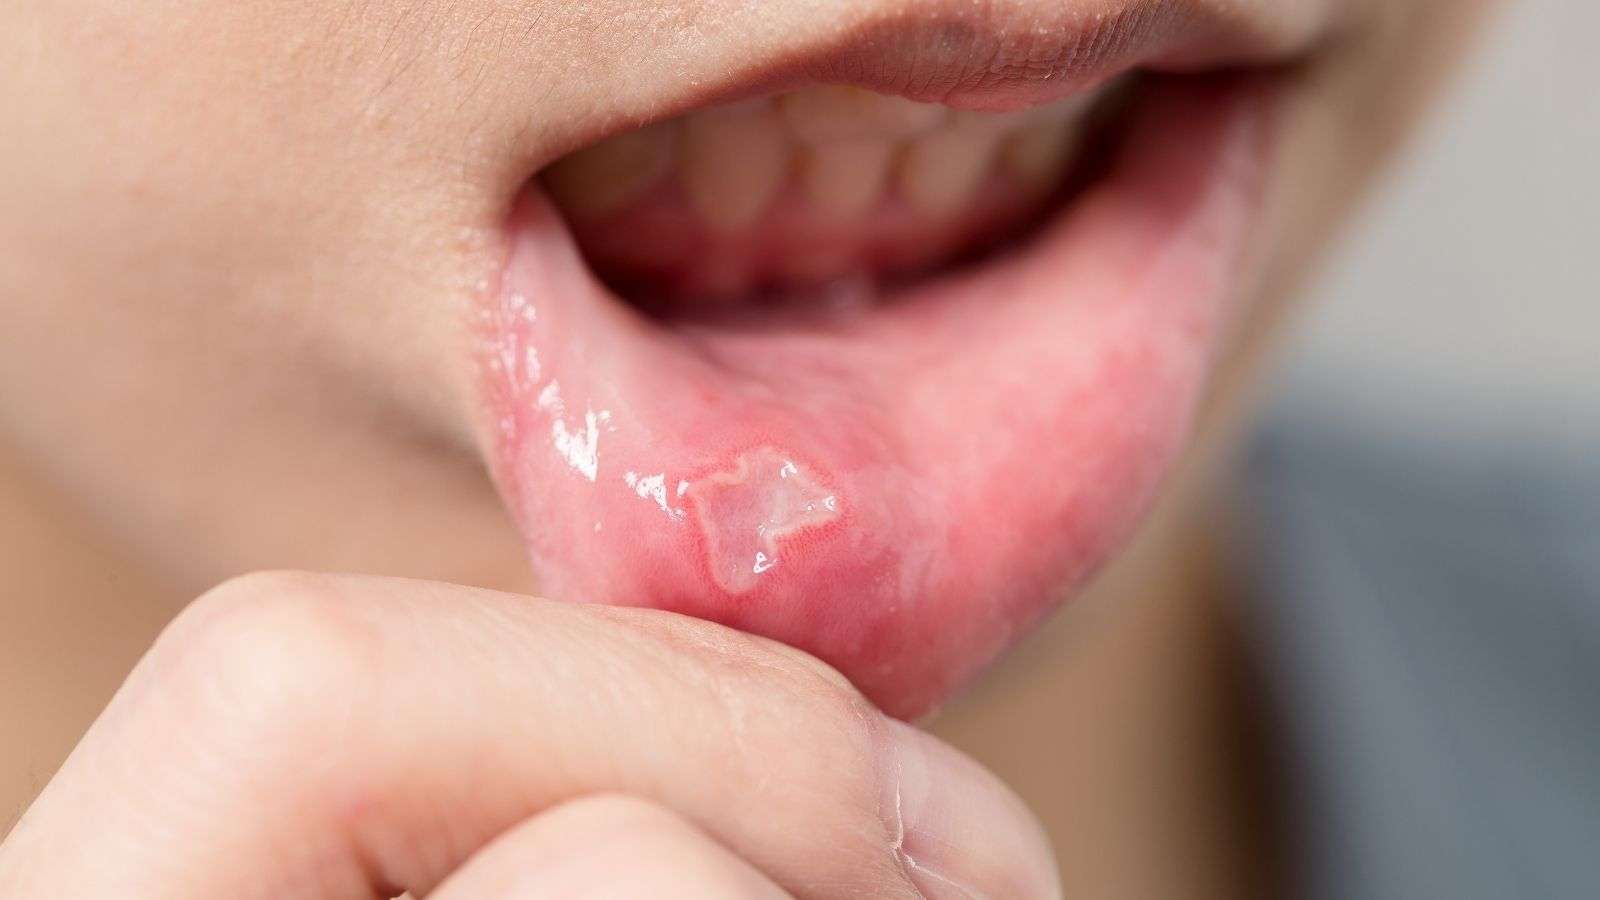 Oral Lesions, Ulcers, and Sores and How to Treat Them